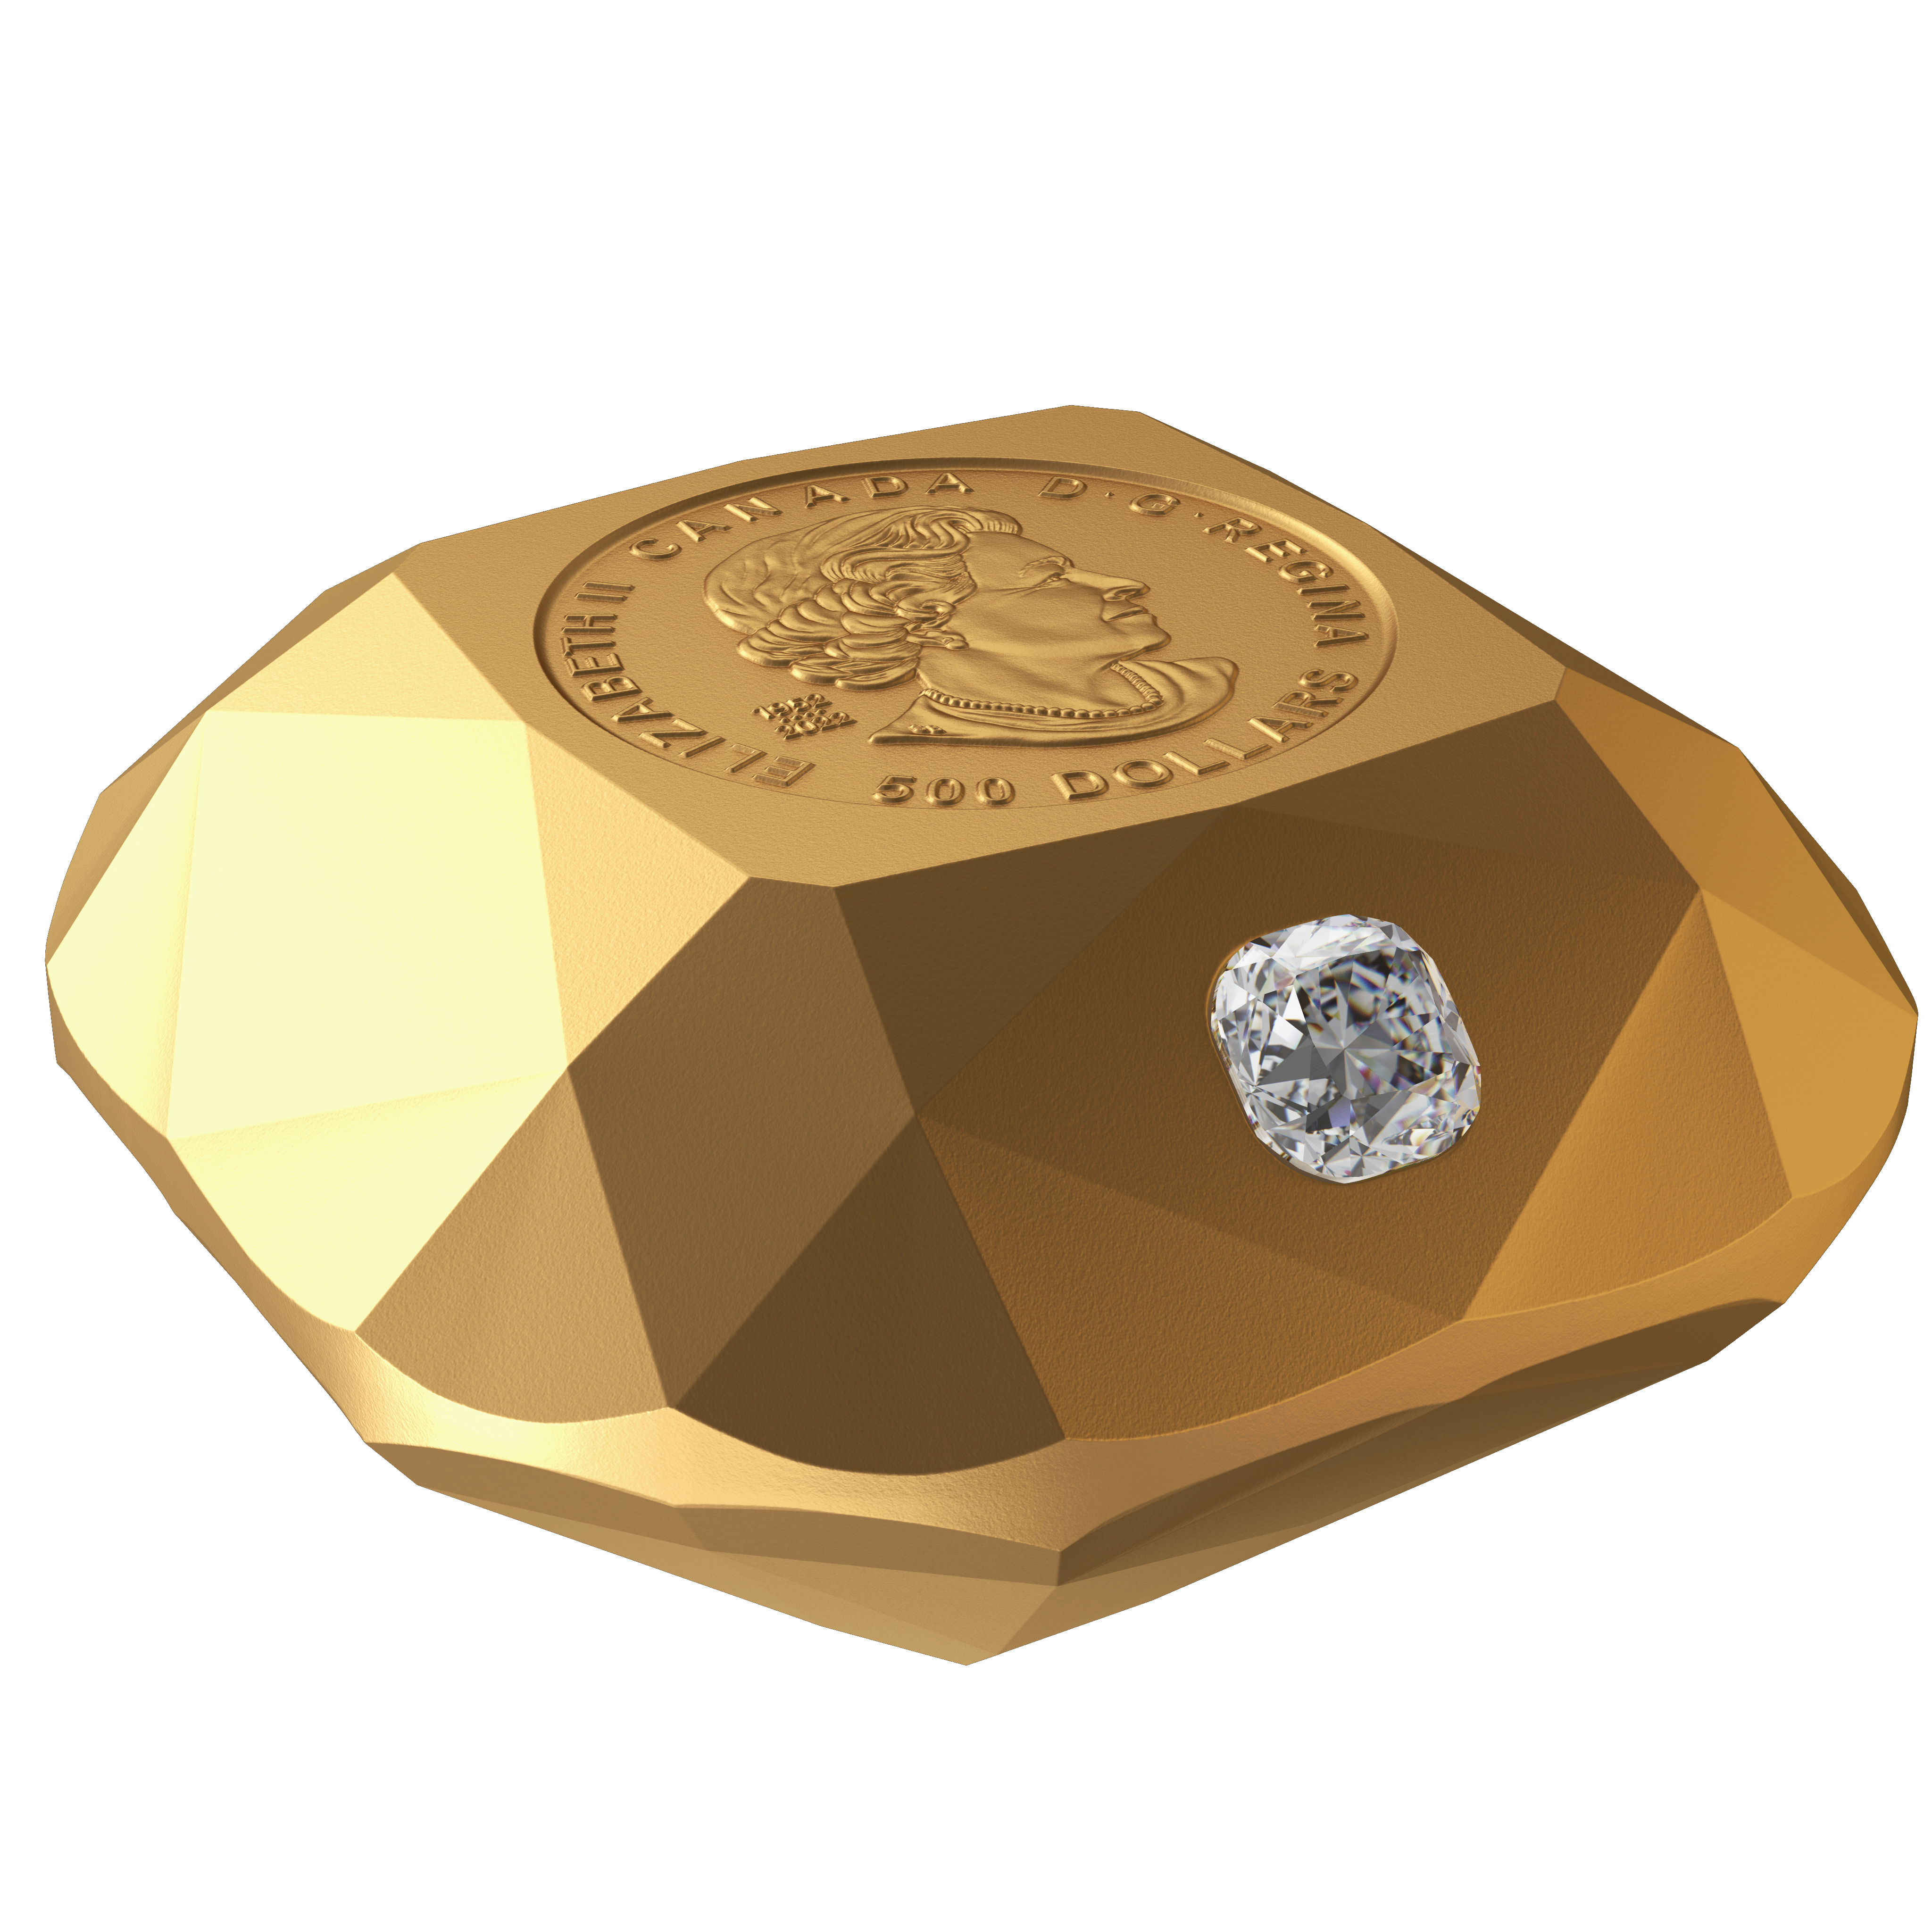 DE BEERS Ideal Cushion Diamond Pure Gold Coin $500 Canada 2024